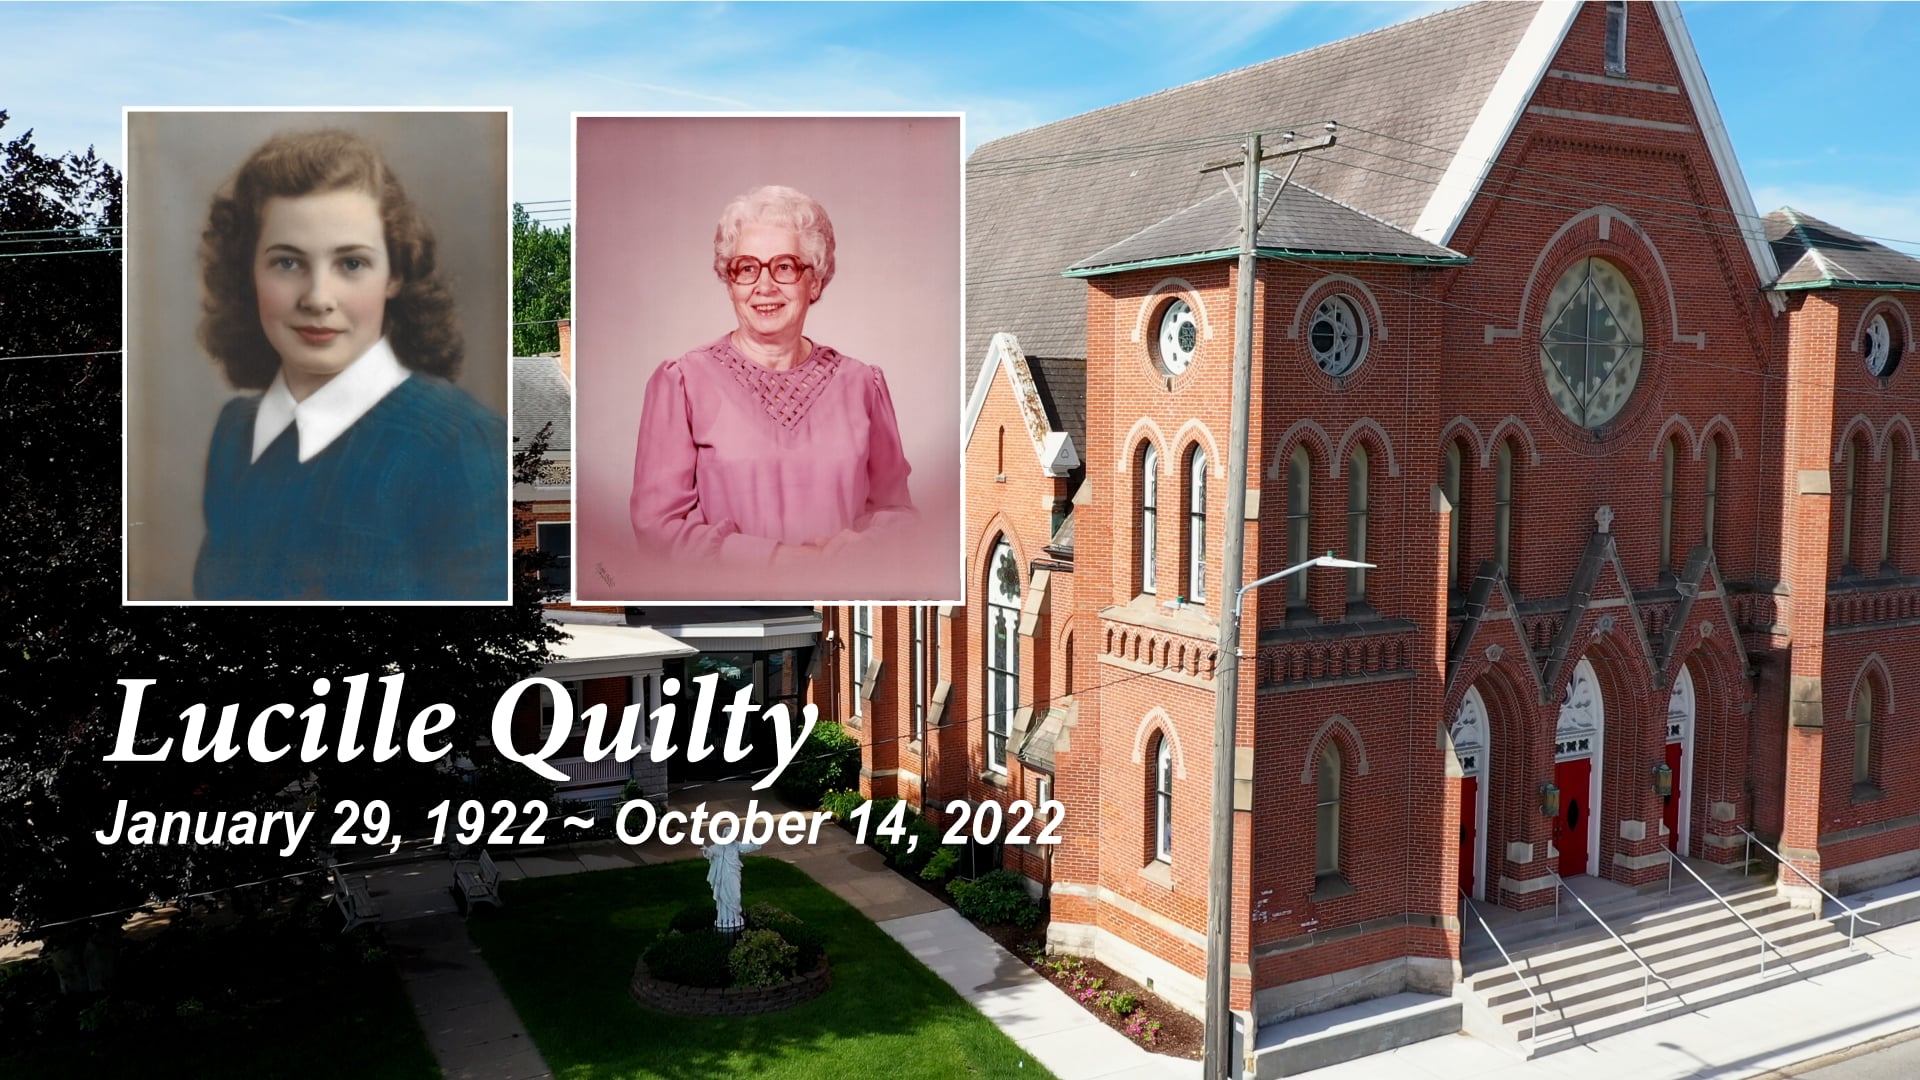 Funeral Mass for Lucille Quilty, Wednesday